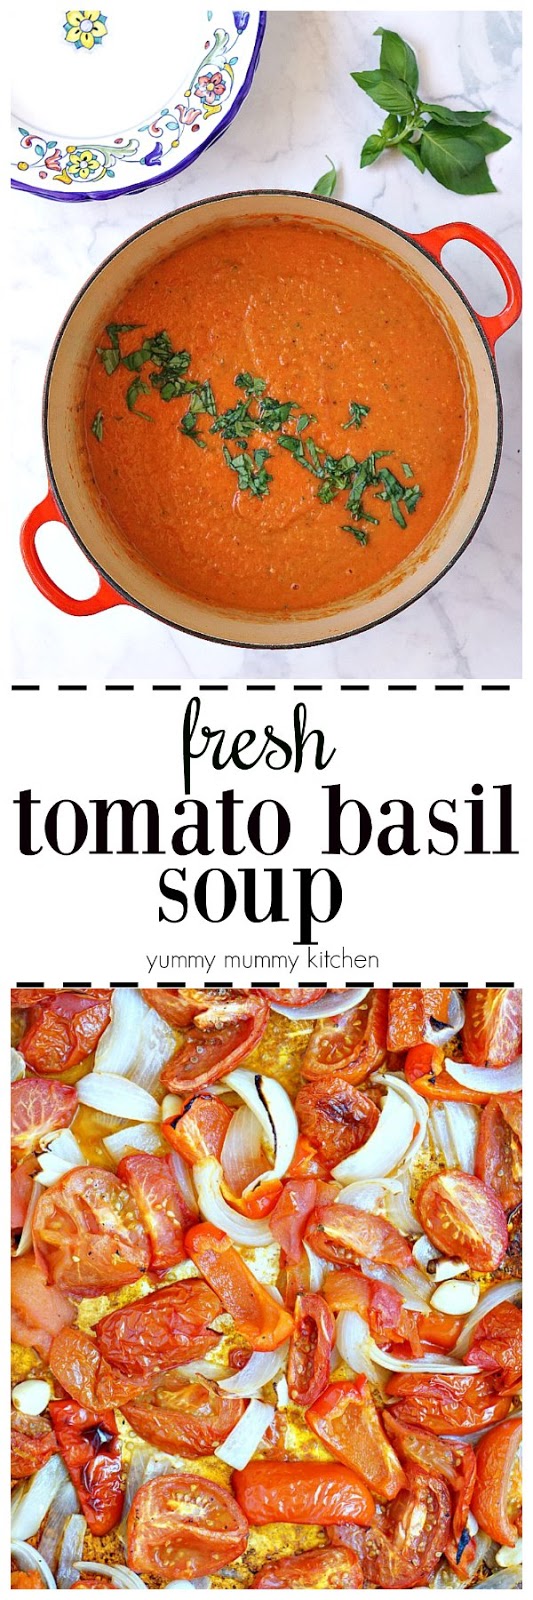 This fresh tomato basil soup is so easy and delicious! Fresh tomatoes are roasted in the oven and blended in a blender with fresh basil. This creamy tomato soup is naturally vegan. 